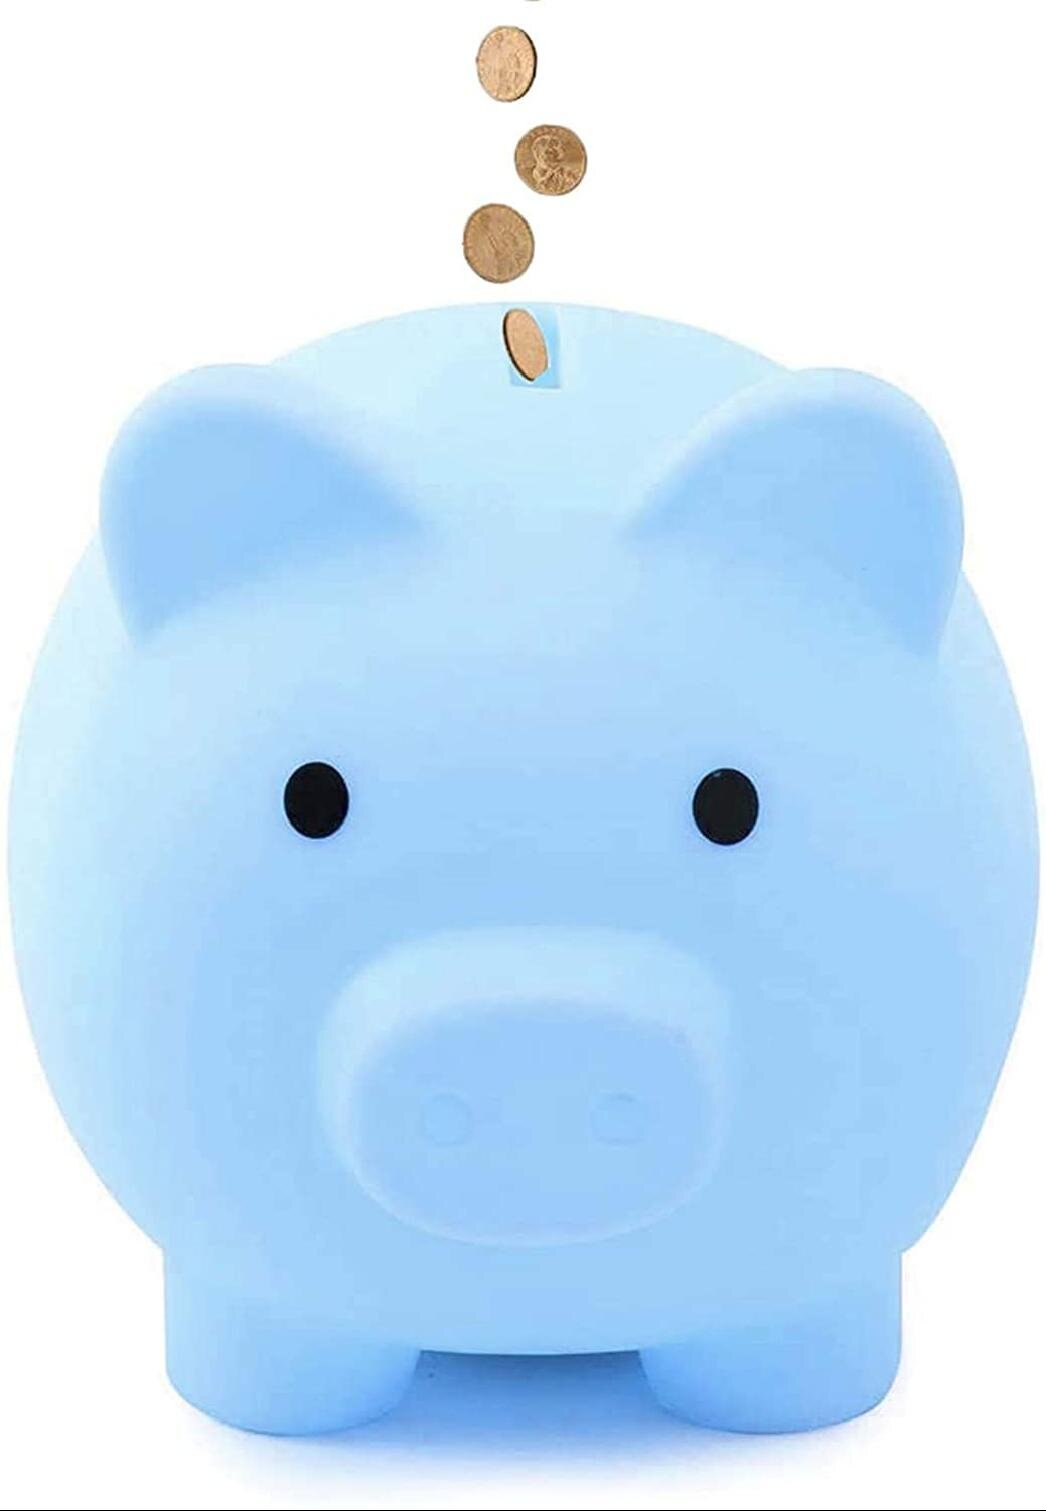 Baby Shower Fun Gifts for Birthday Piggy Bank Cute Coin Bank Kids Toy Bank Unbreakable Plastic Pig Money Bank Saving Coin Box for Boys Girls Kids Festival Green